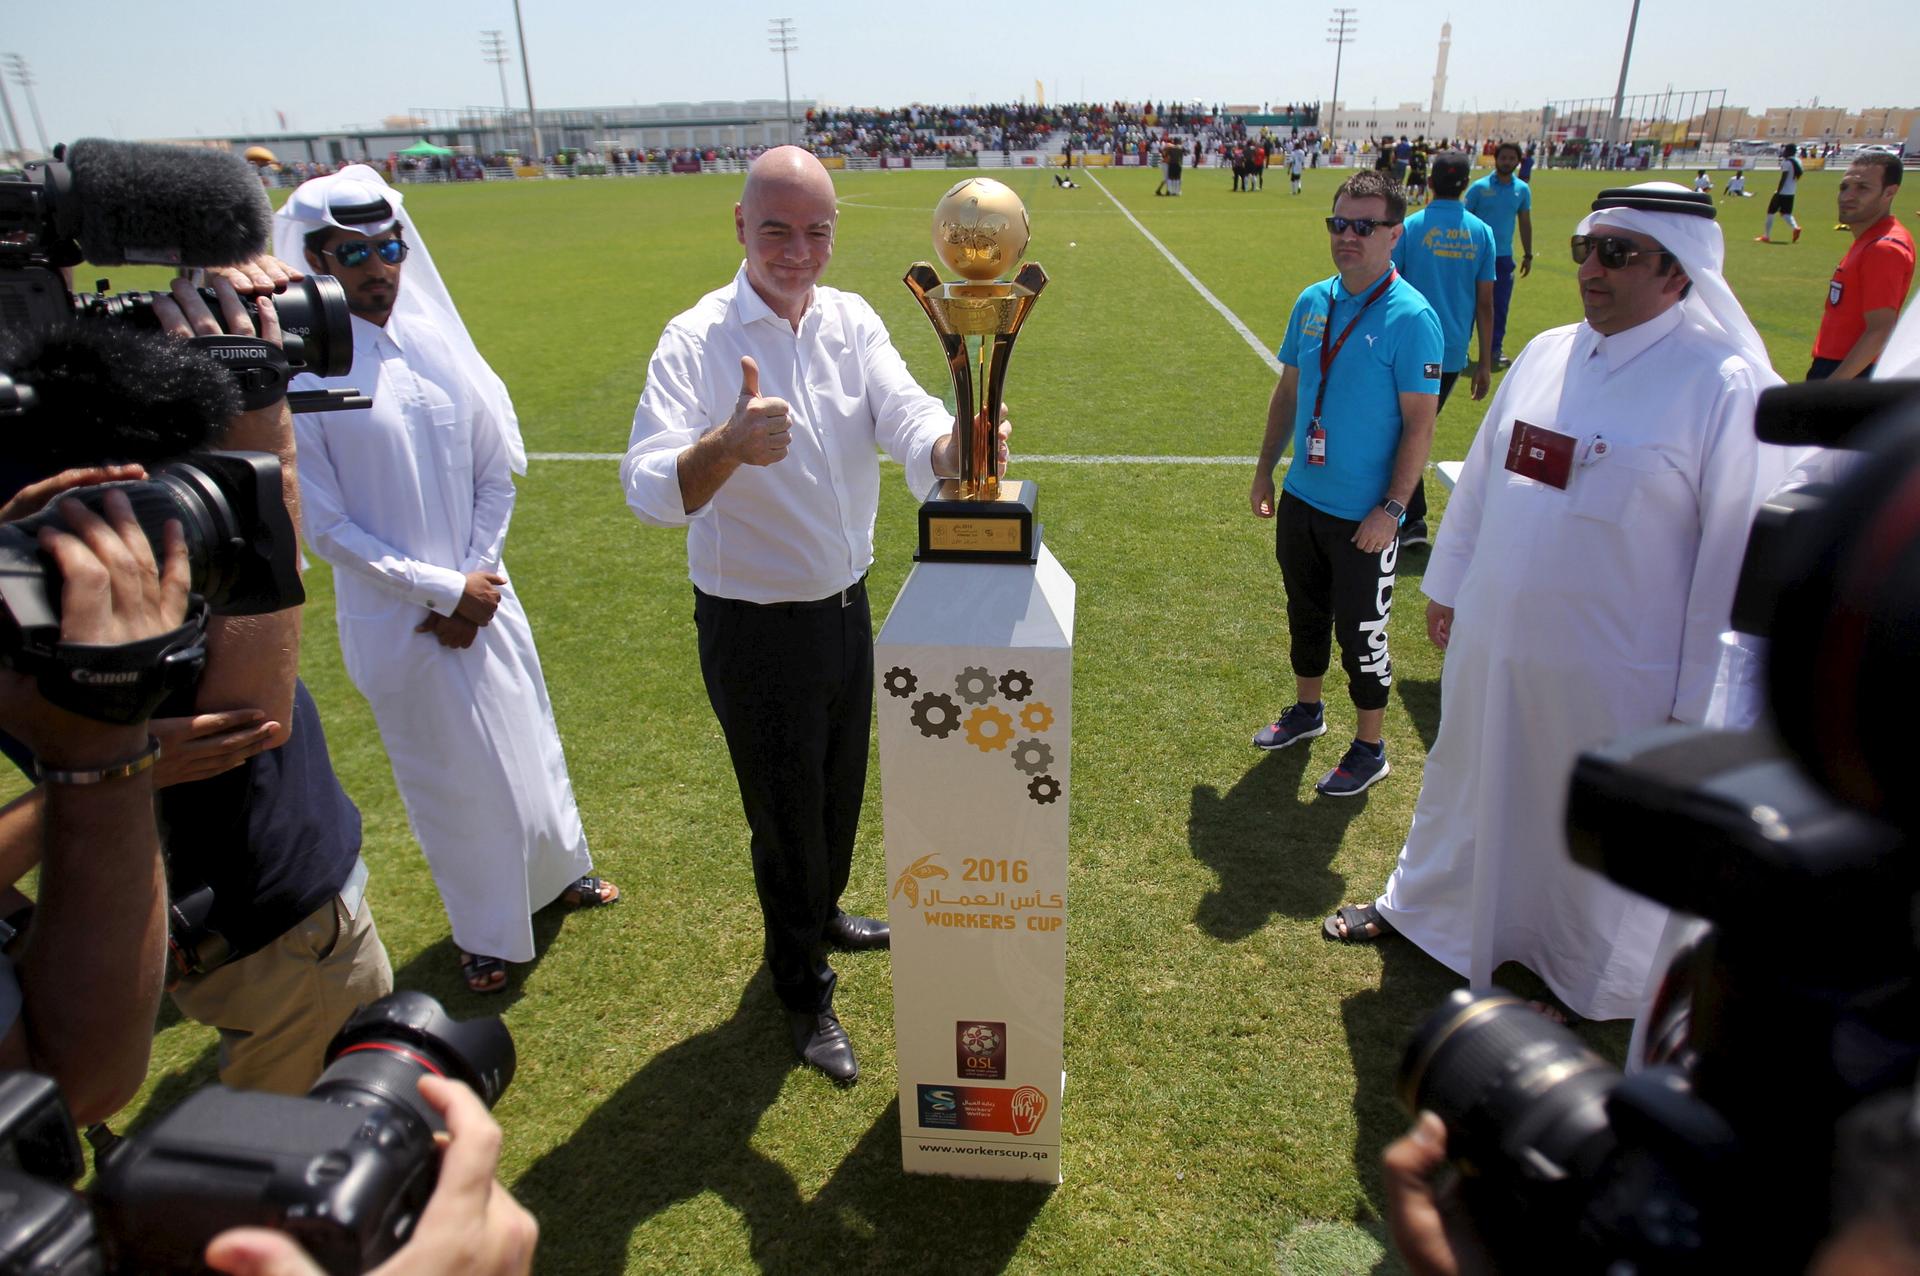 FIFA's newly elected president Gianni Infantino poses with the Qatar Workers Cup trophy in Doha, Qatar, April 22, 2016.